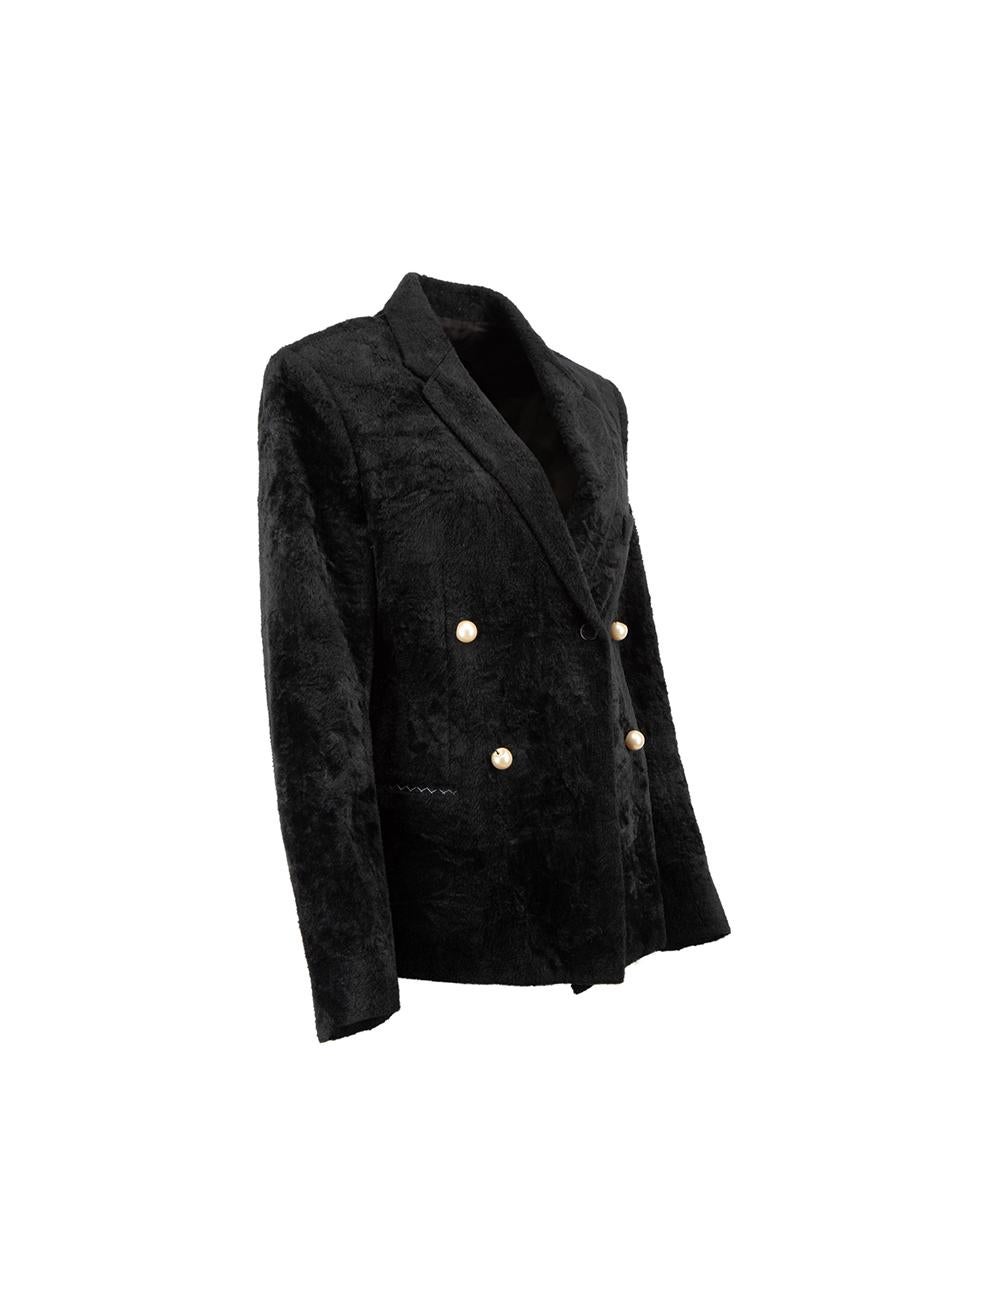 CONDITION is Never Worn. No visible wear to jacket is evident on this used Céline designer resale item.




Details


Black

Faux fur

Short length blazer

Double breasted with pearl buttons

Front side pockets

Internal buttoned pocket





Made in